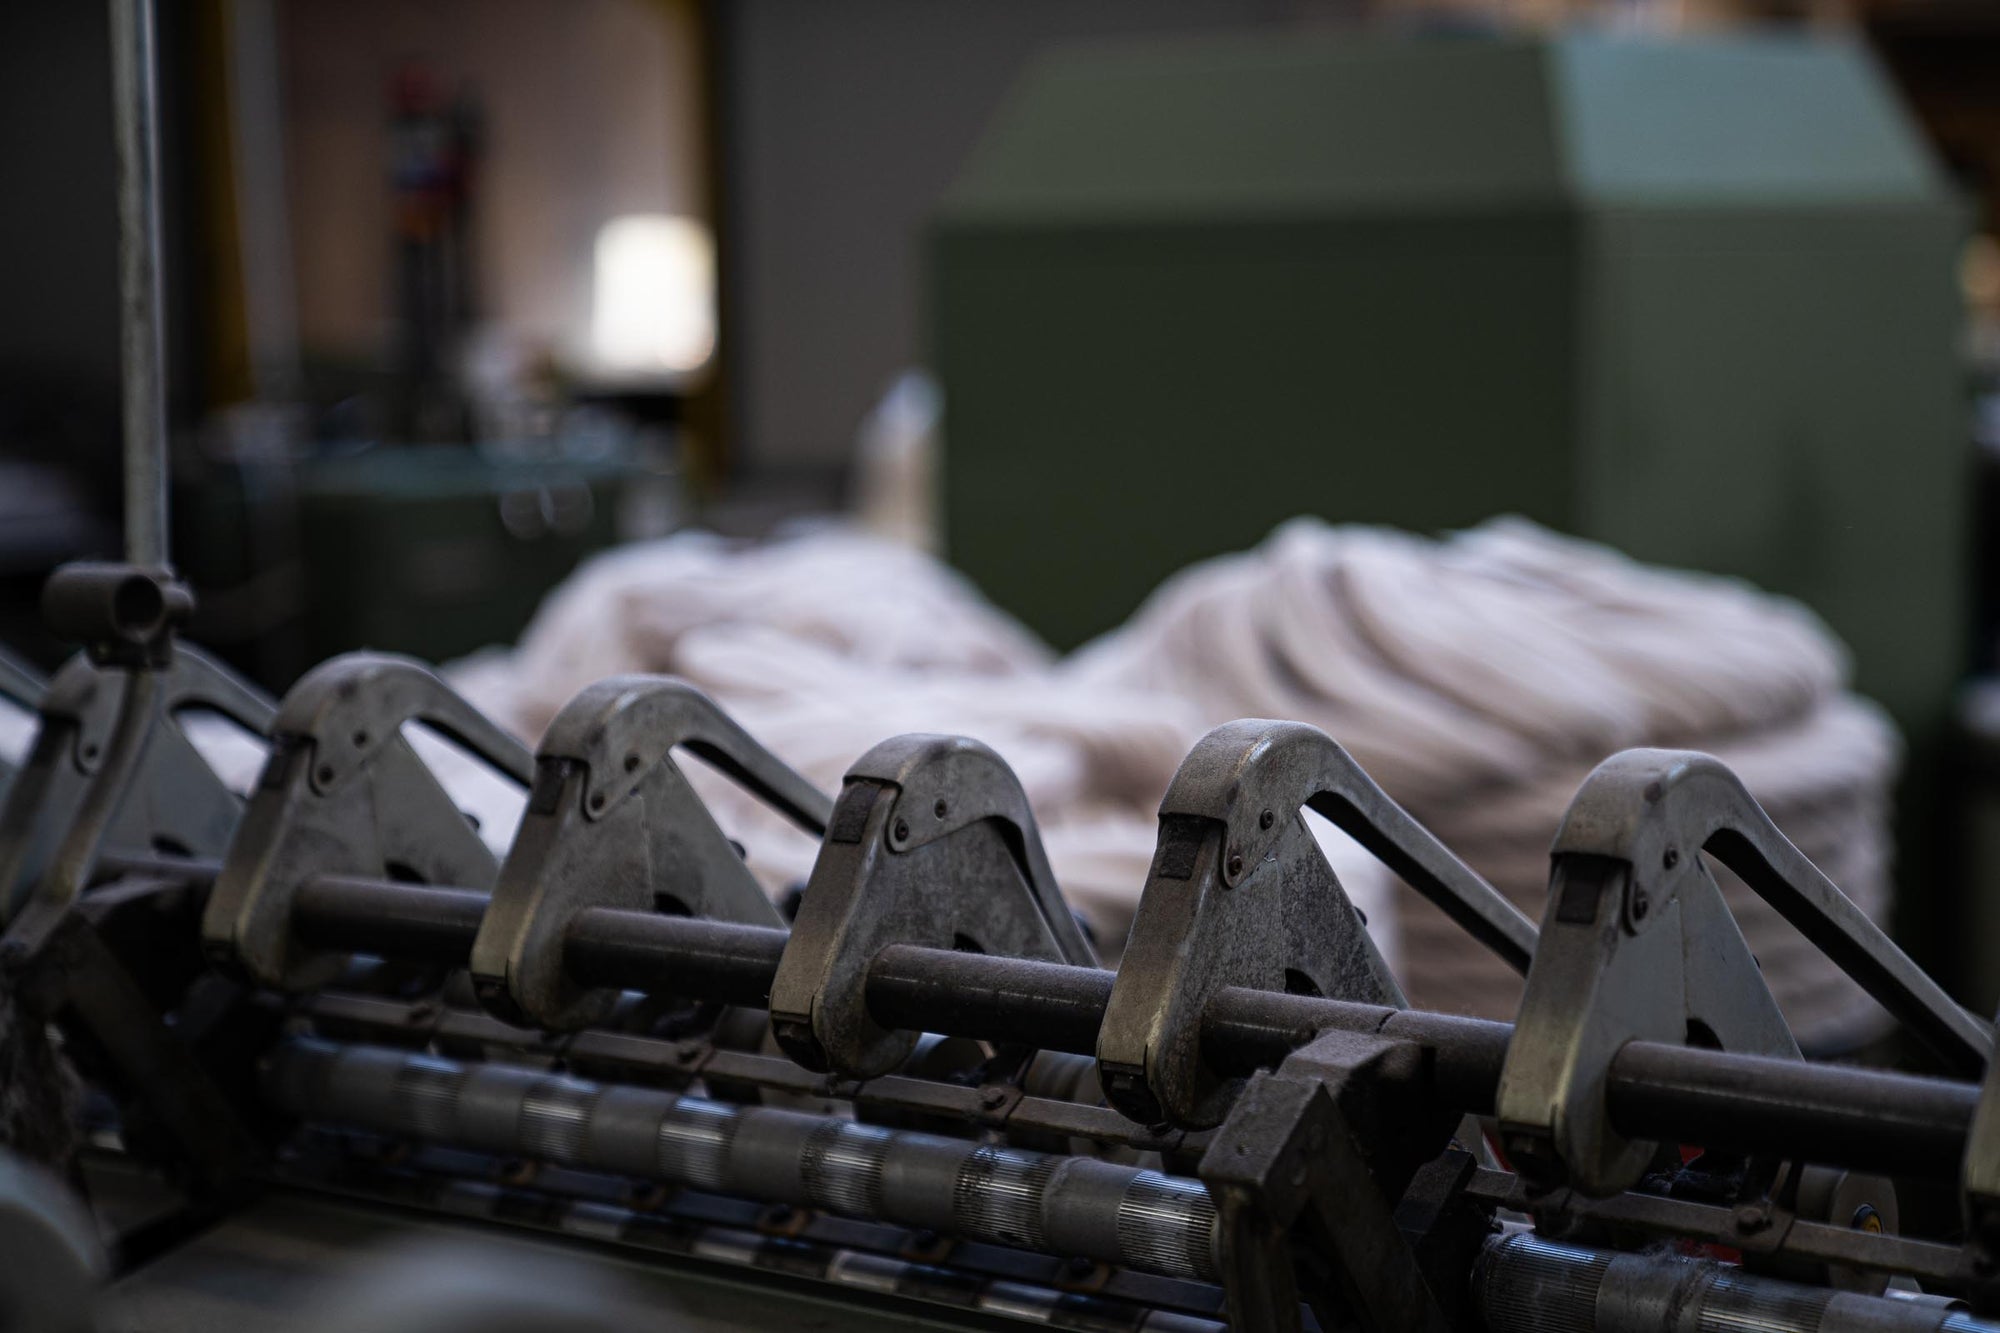 A close-up of a spinning frame at the ARA spinning facility, with combed wool tops in the background.